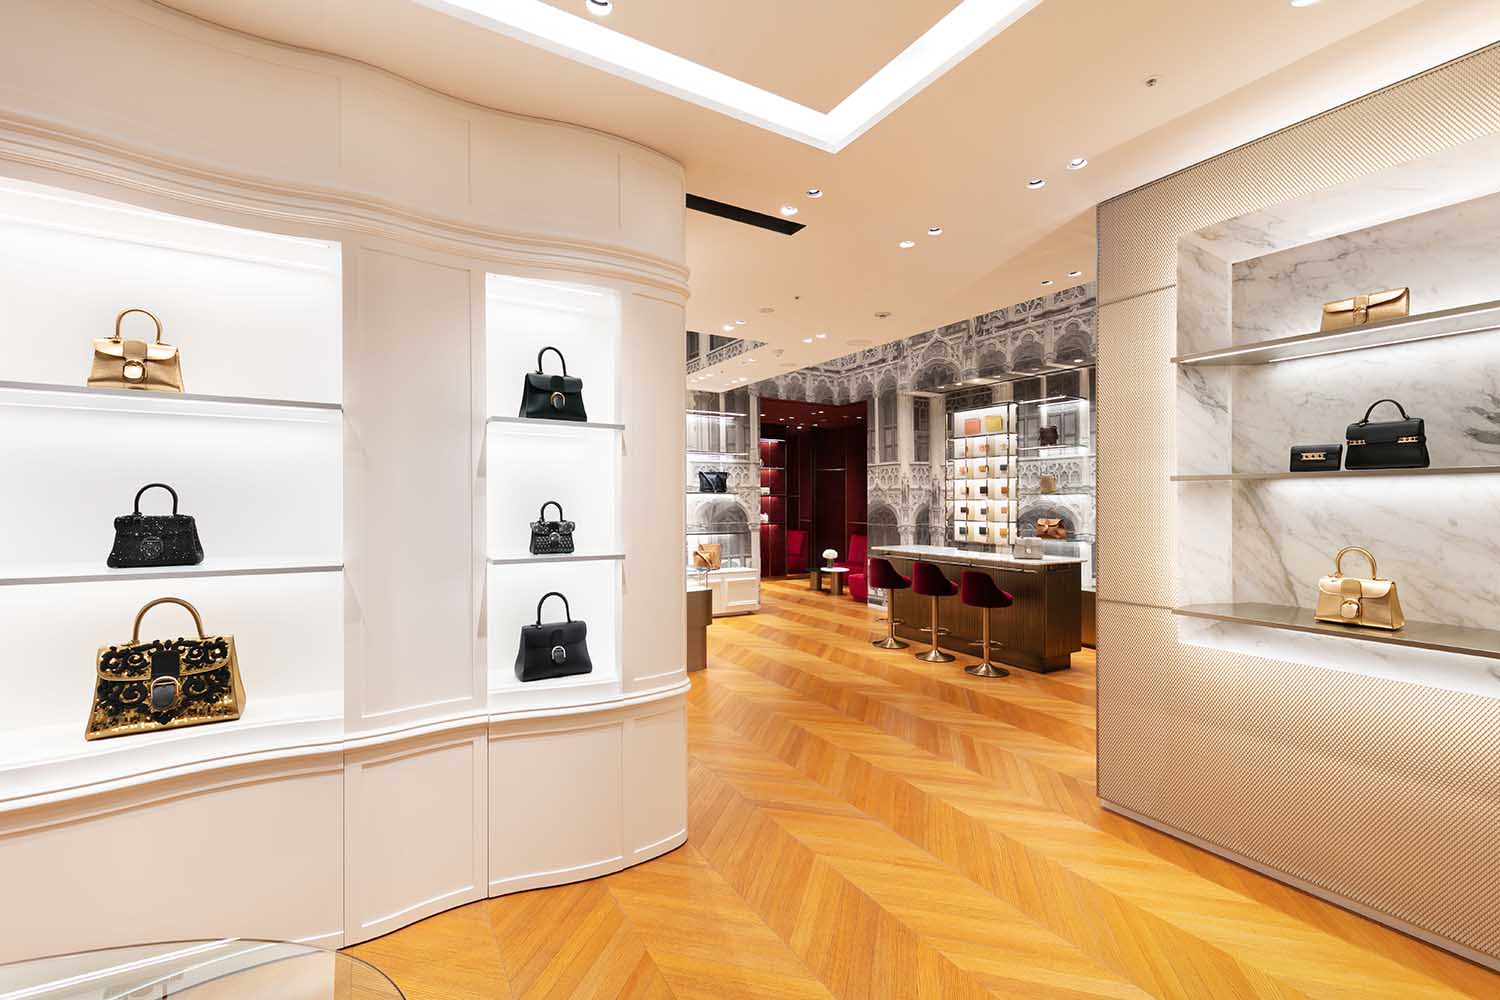 Fendi opened a new flagship store in Tokyo at Omotesando